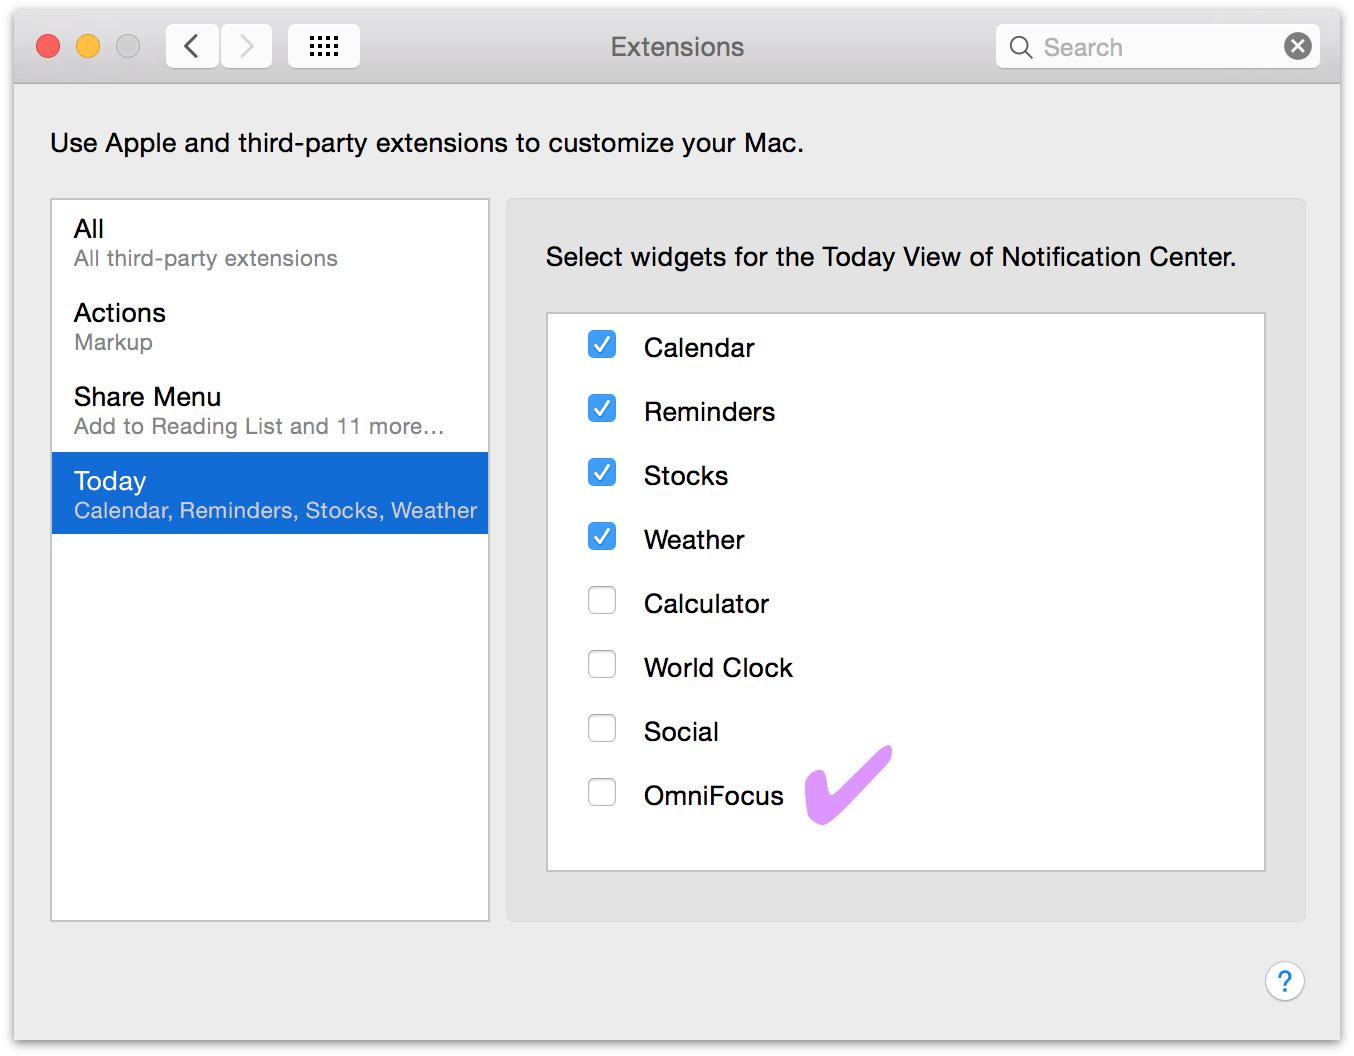 The Today extension in System Preferences